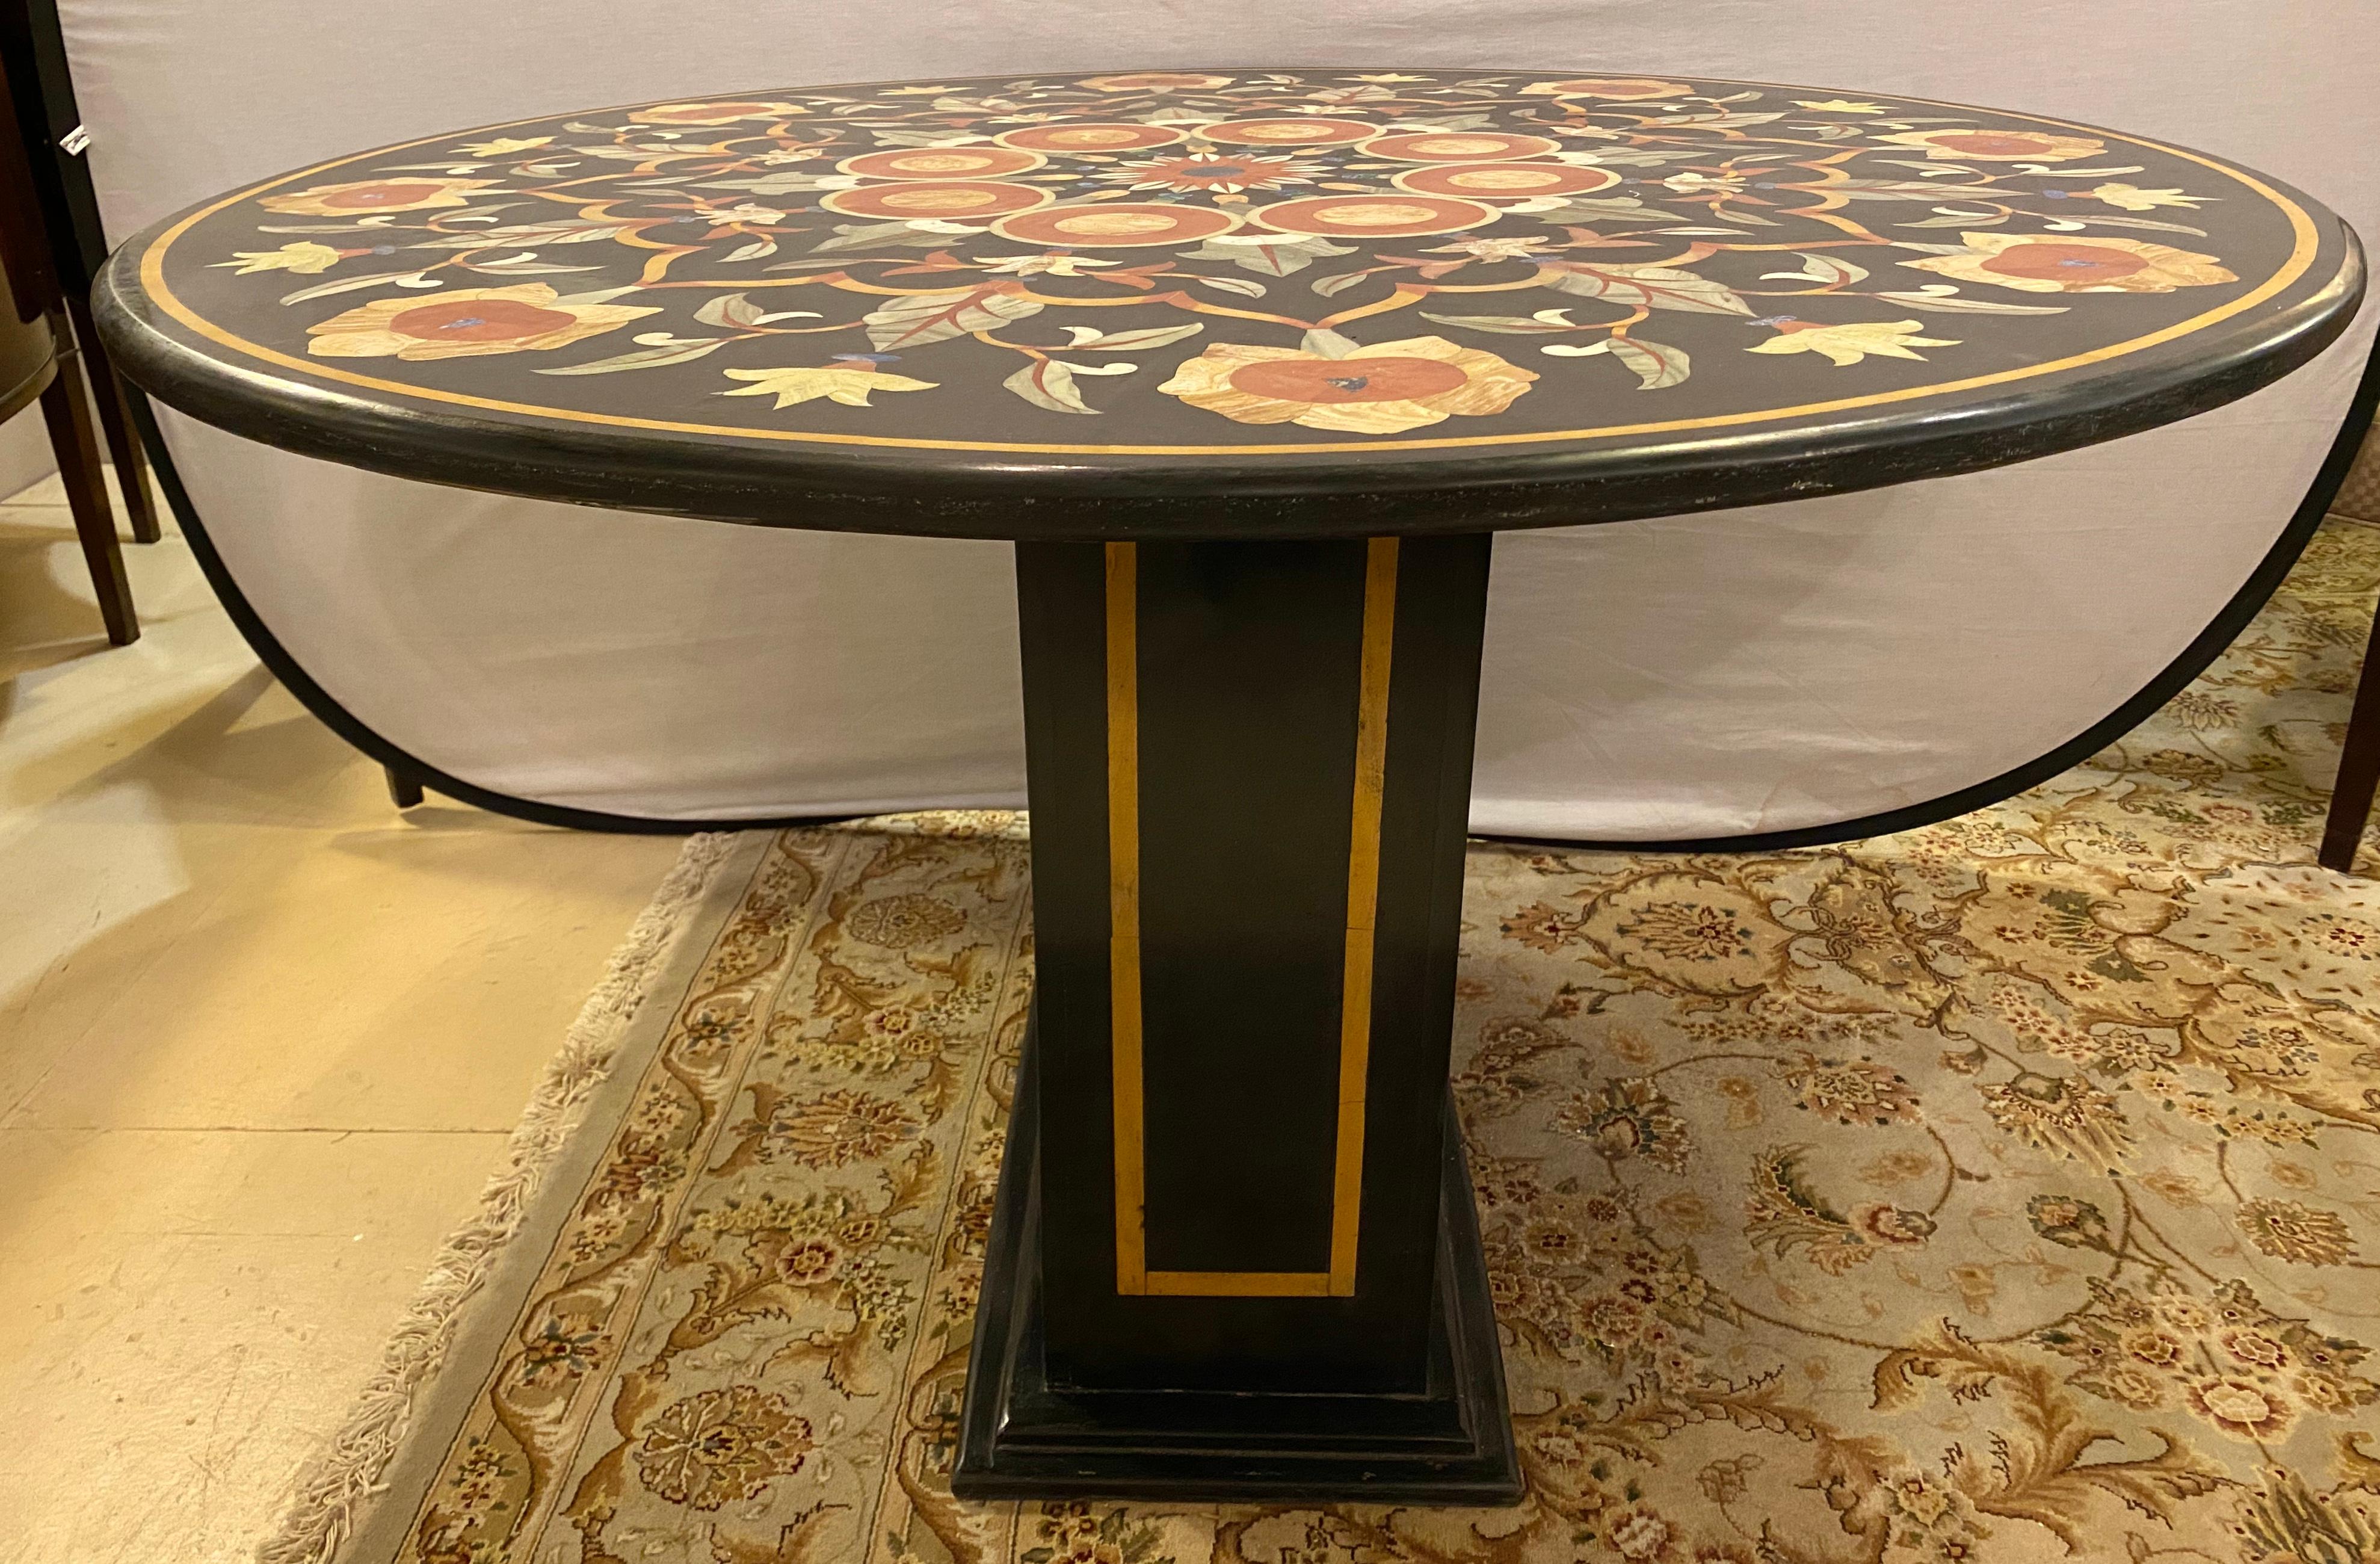 Arts and Crafts Pietra Dura Marble-Top Dining or Center Table, Arts & Crafts Movement